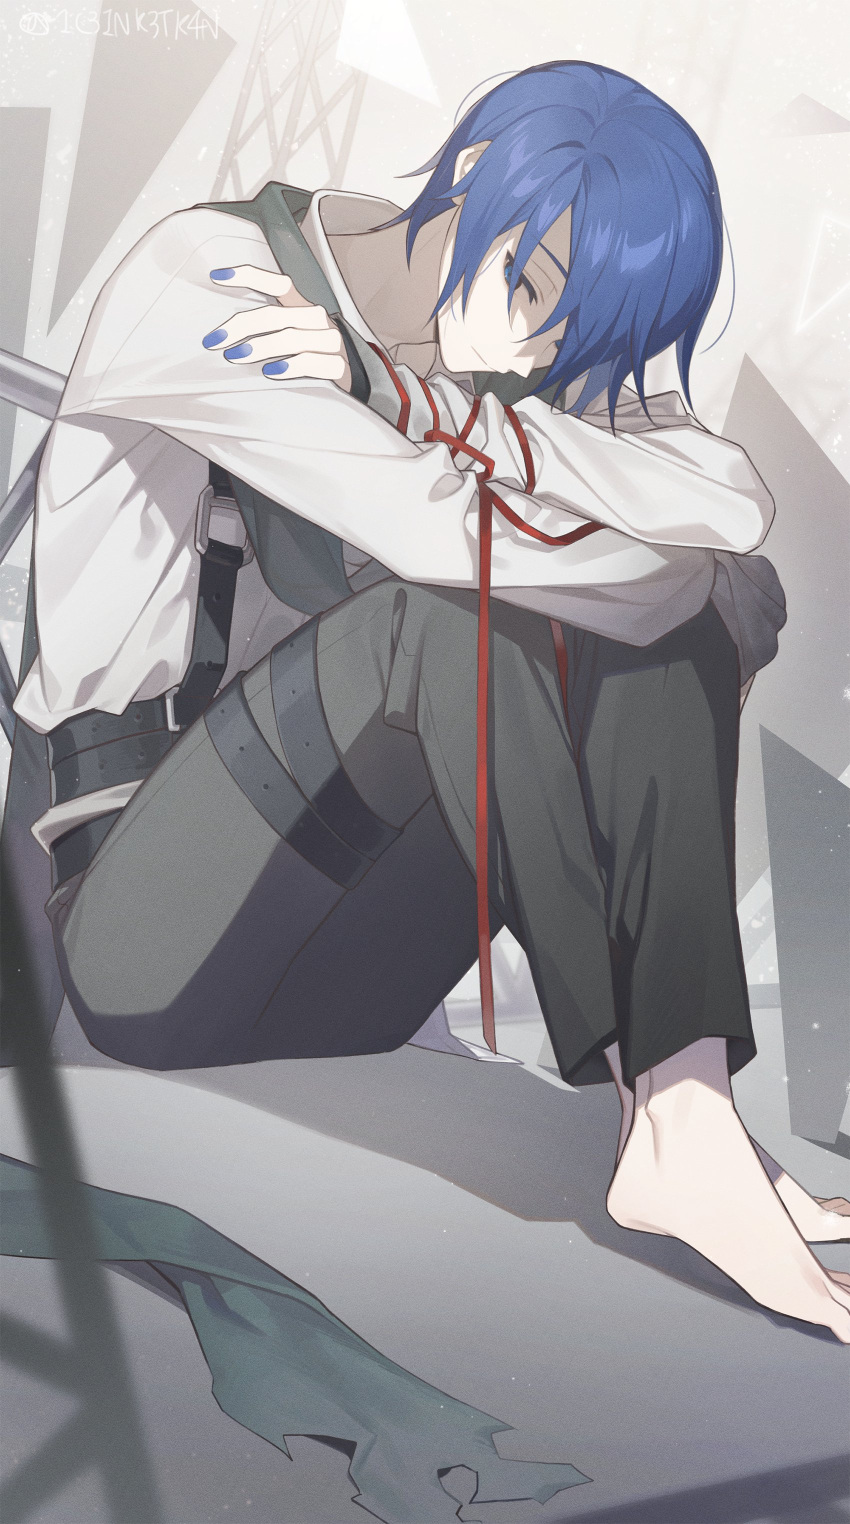 1boy 1c3ink3tk4n absurdres arms_on_knees artist_name bangs barefoot belt black_belt blue_eyes blue_hair collared_shirt crossed_ankles crossed_arms fence full_body green_neckwear grey_pants highres kaito_(vocaloid) male_focus nail_polish pale_skin pants parted_bangs pensive project_sekai red_ribbon ribbon scarf shirt short_hair sitting slouching solo suspenders vocaloid white_shirt